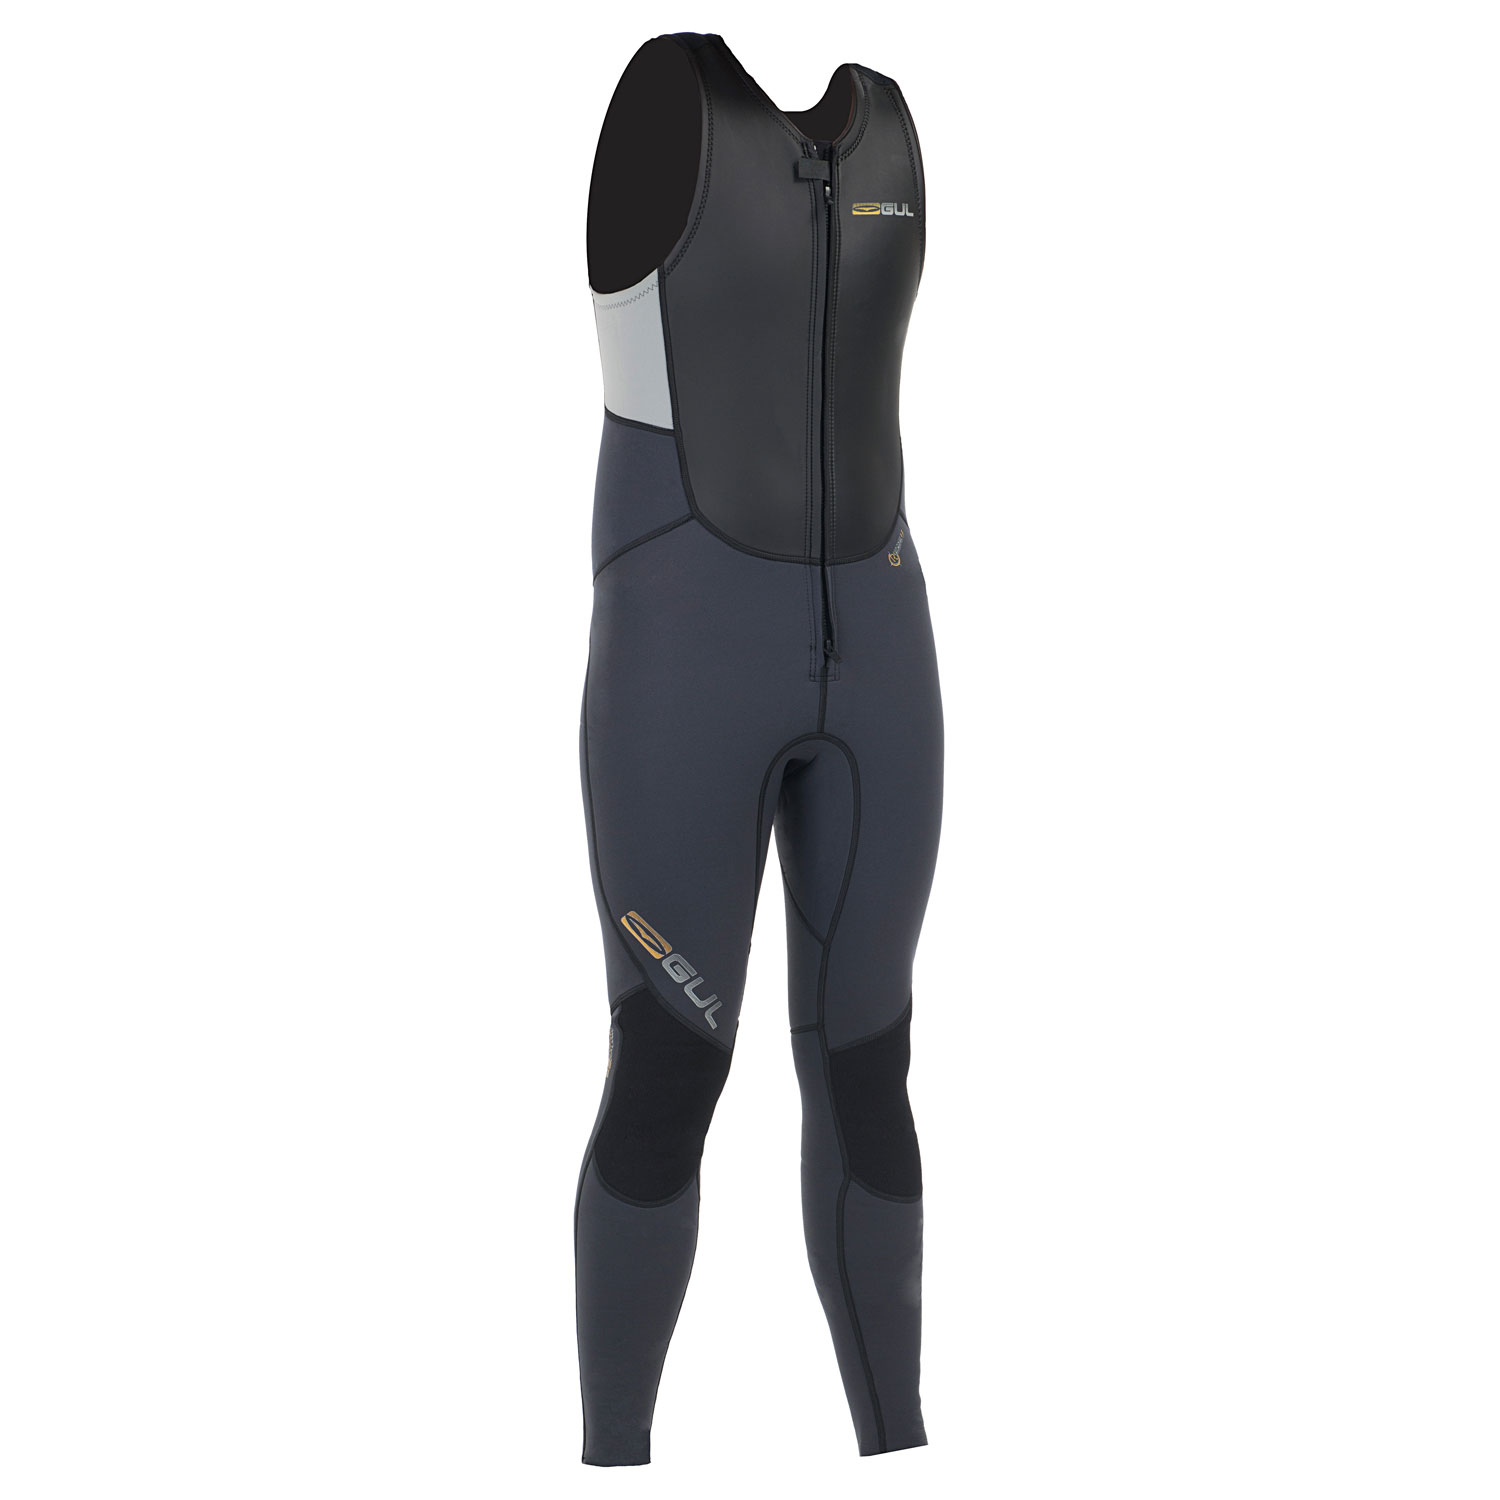 SUP Wetsuits & Clothing | Wetsuits & Clothing for SUP | Wetsuits ...